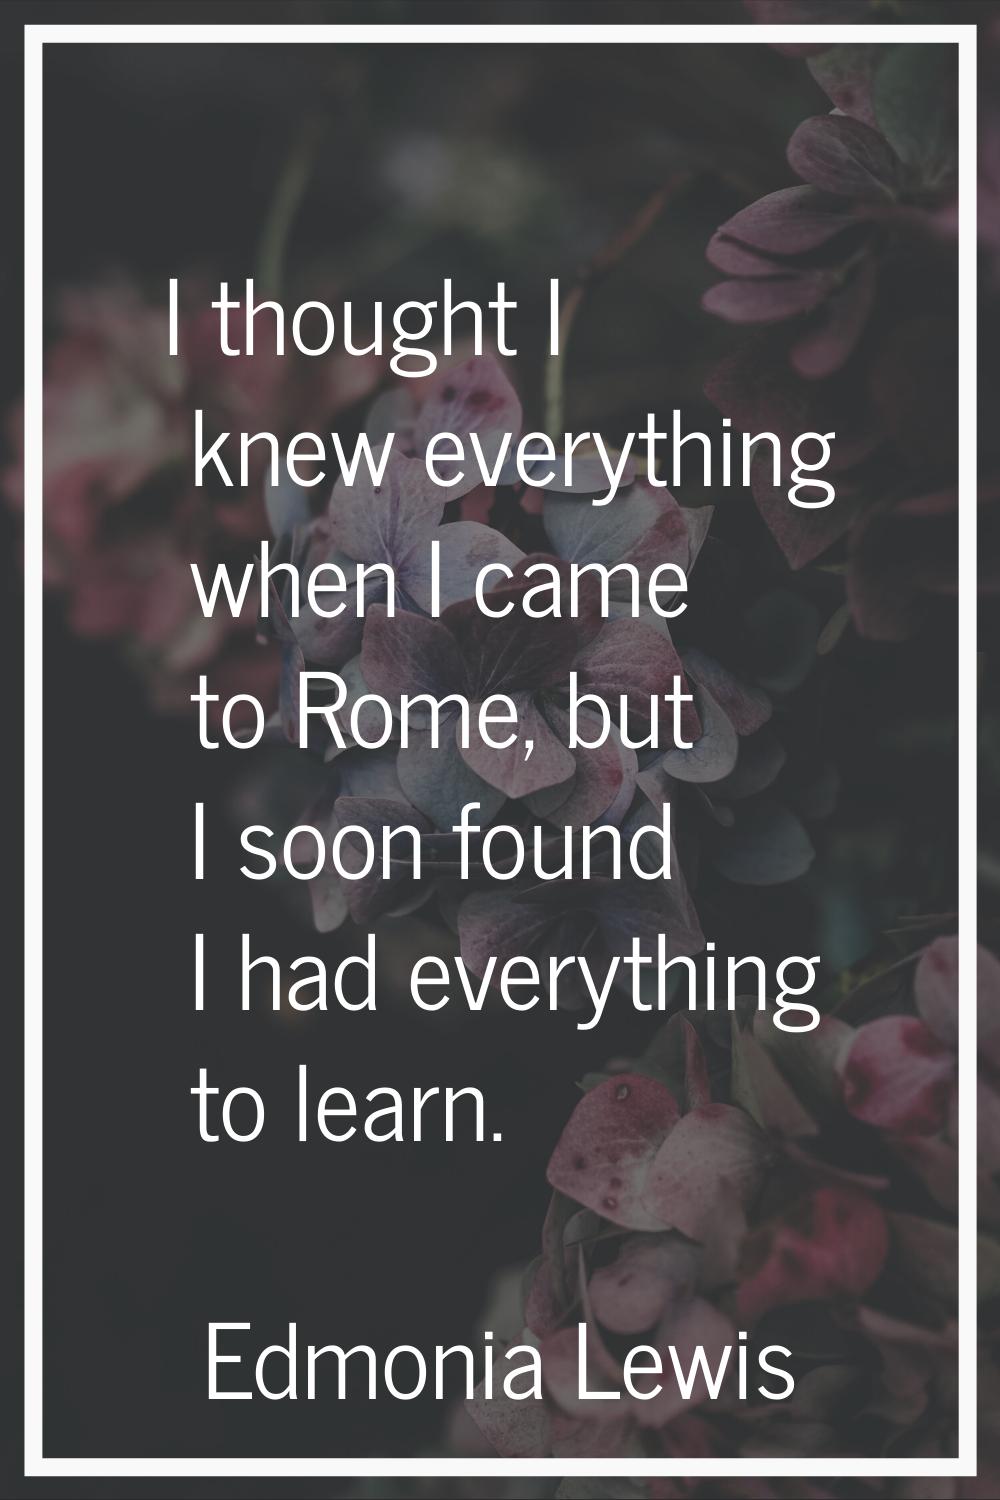 I thought I knew everything when I came to Rome, but I soon found I had everything to learn.